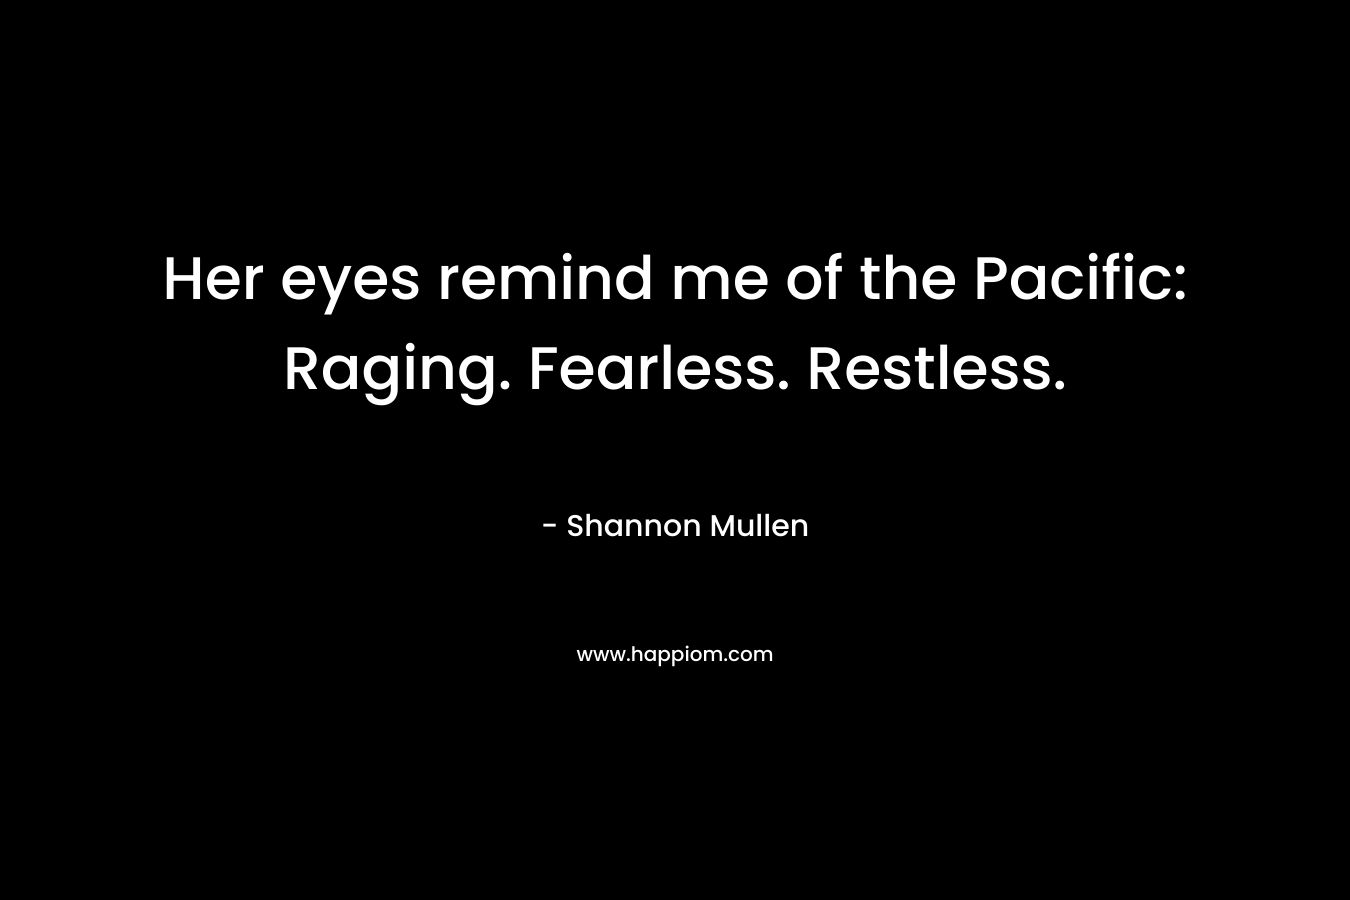 Her eyes remind me of the Pacific: Raging. Fearless. Restless.